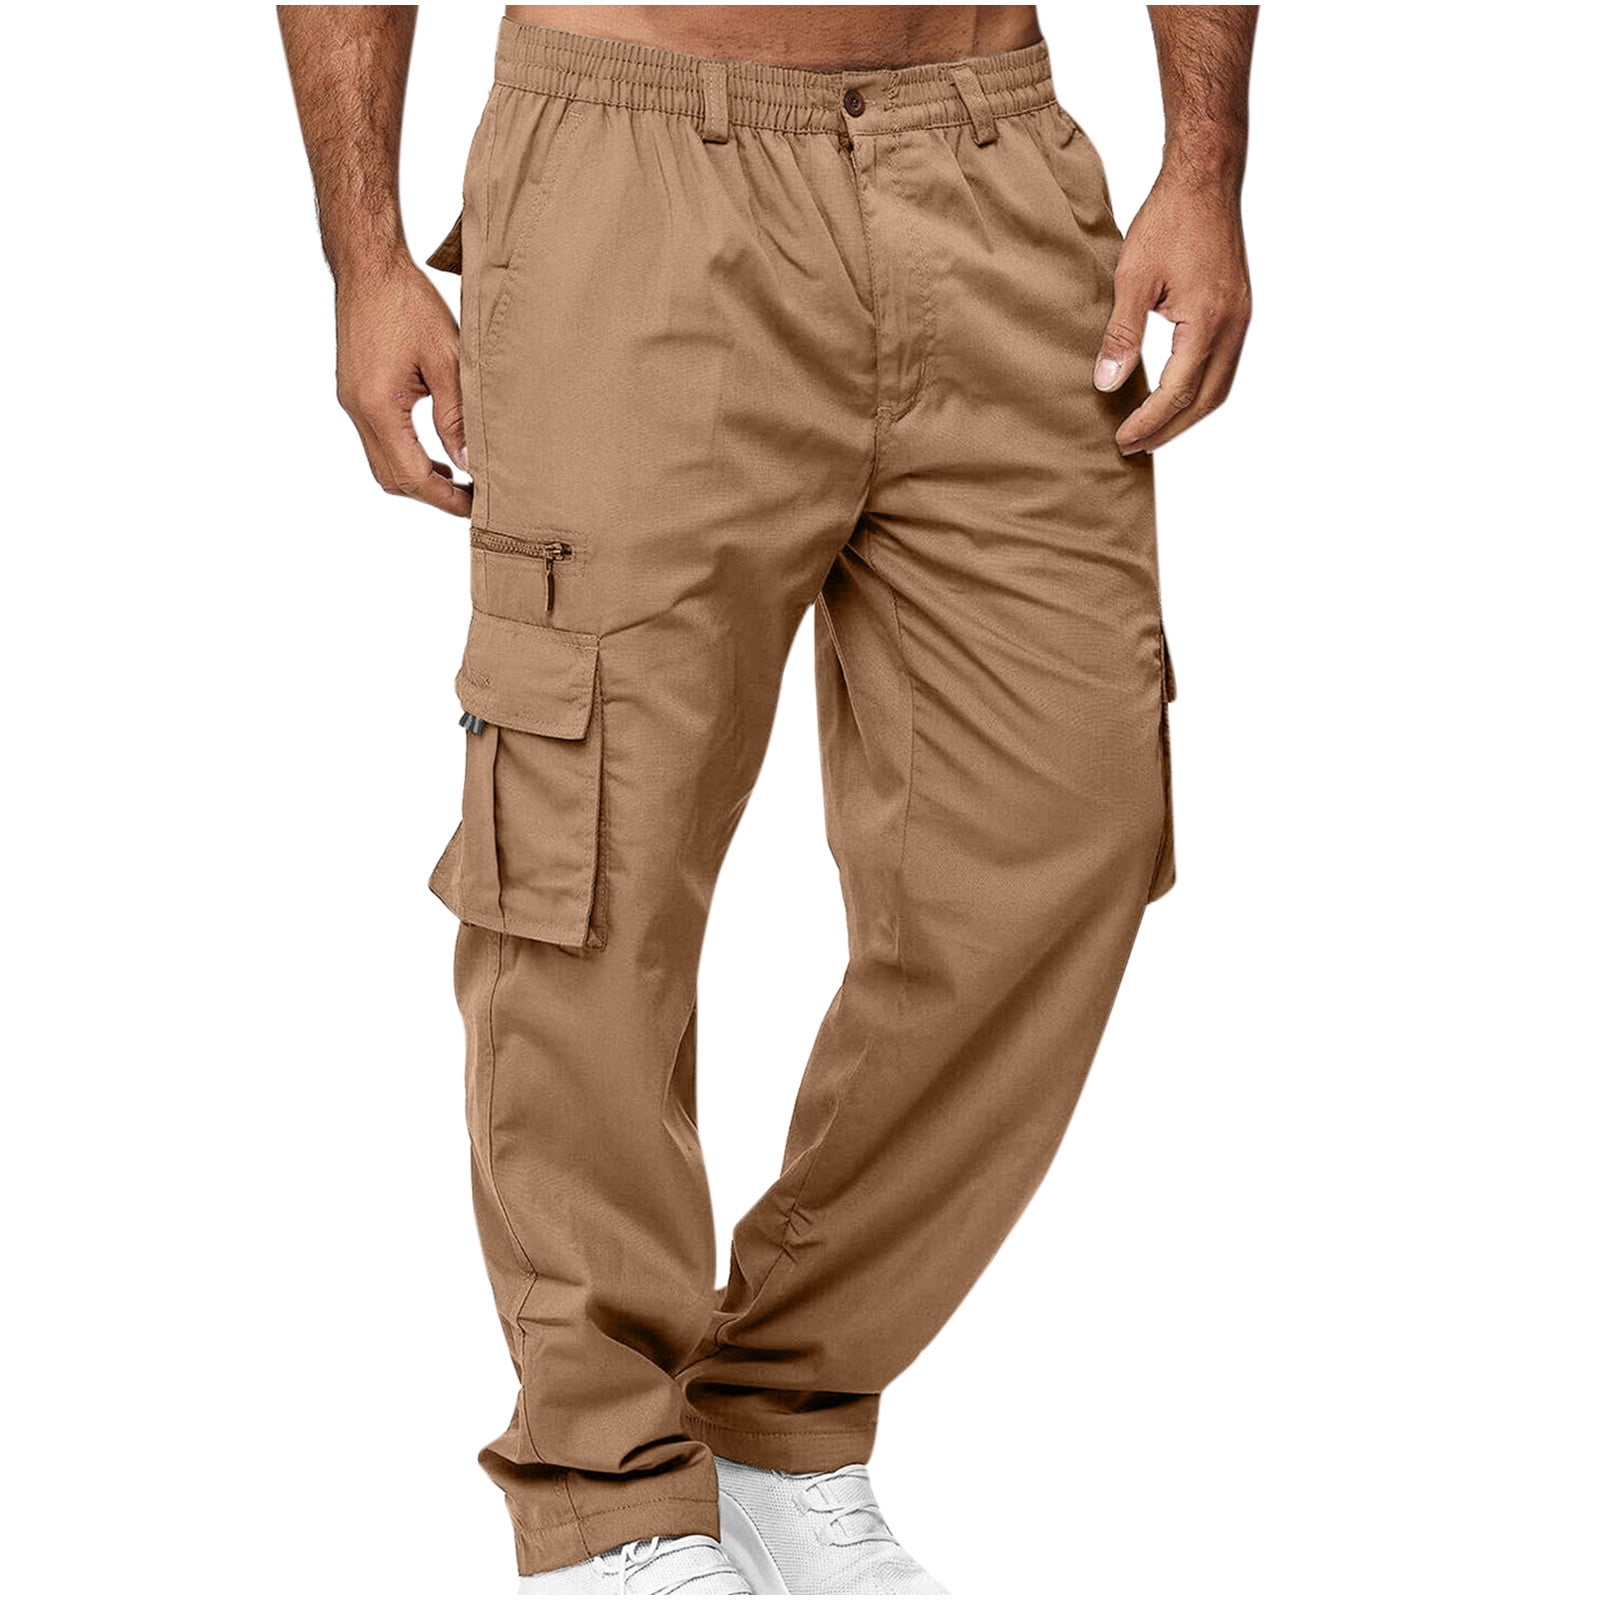 Fall Clearance Sale! RQYYD Men's Cargo Pants with Multi-Pockets Cotton Sweatpants  Casual Athletic Jogger Work Sports Outdoor Trousers(Army Green,XL) 